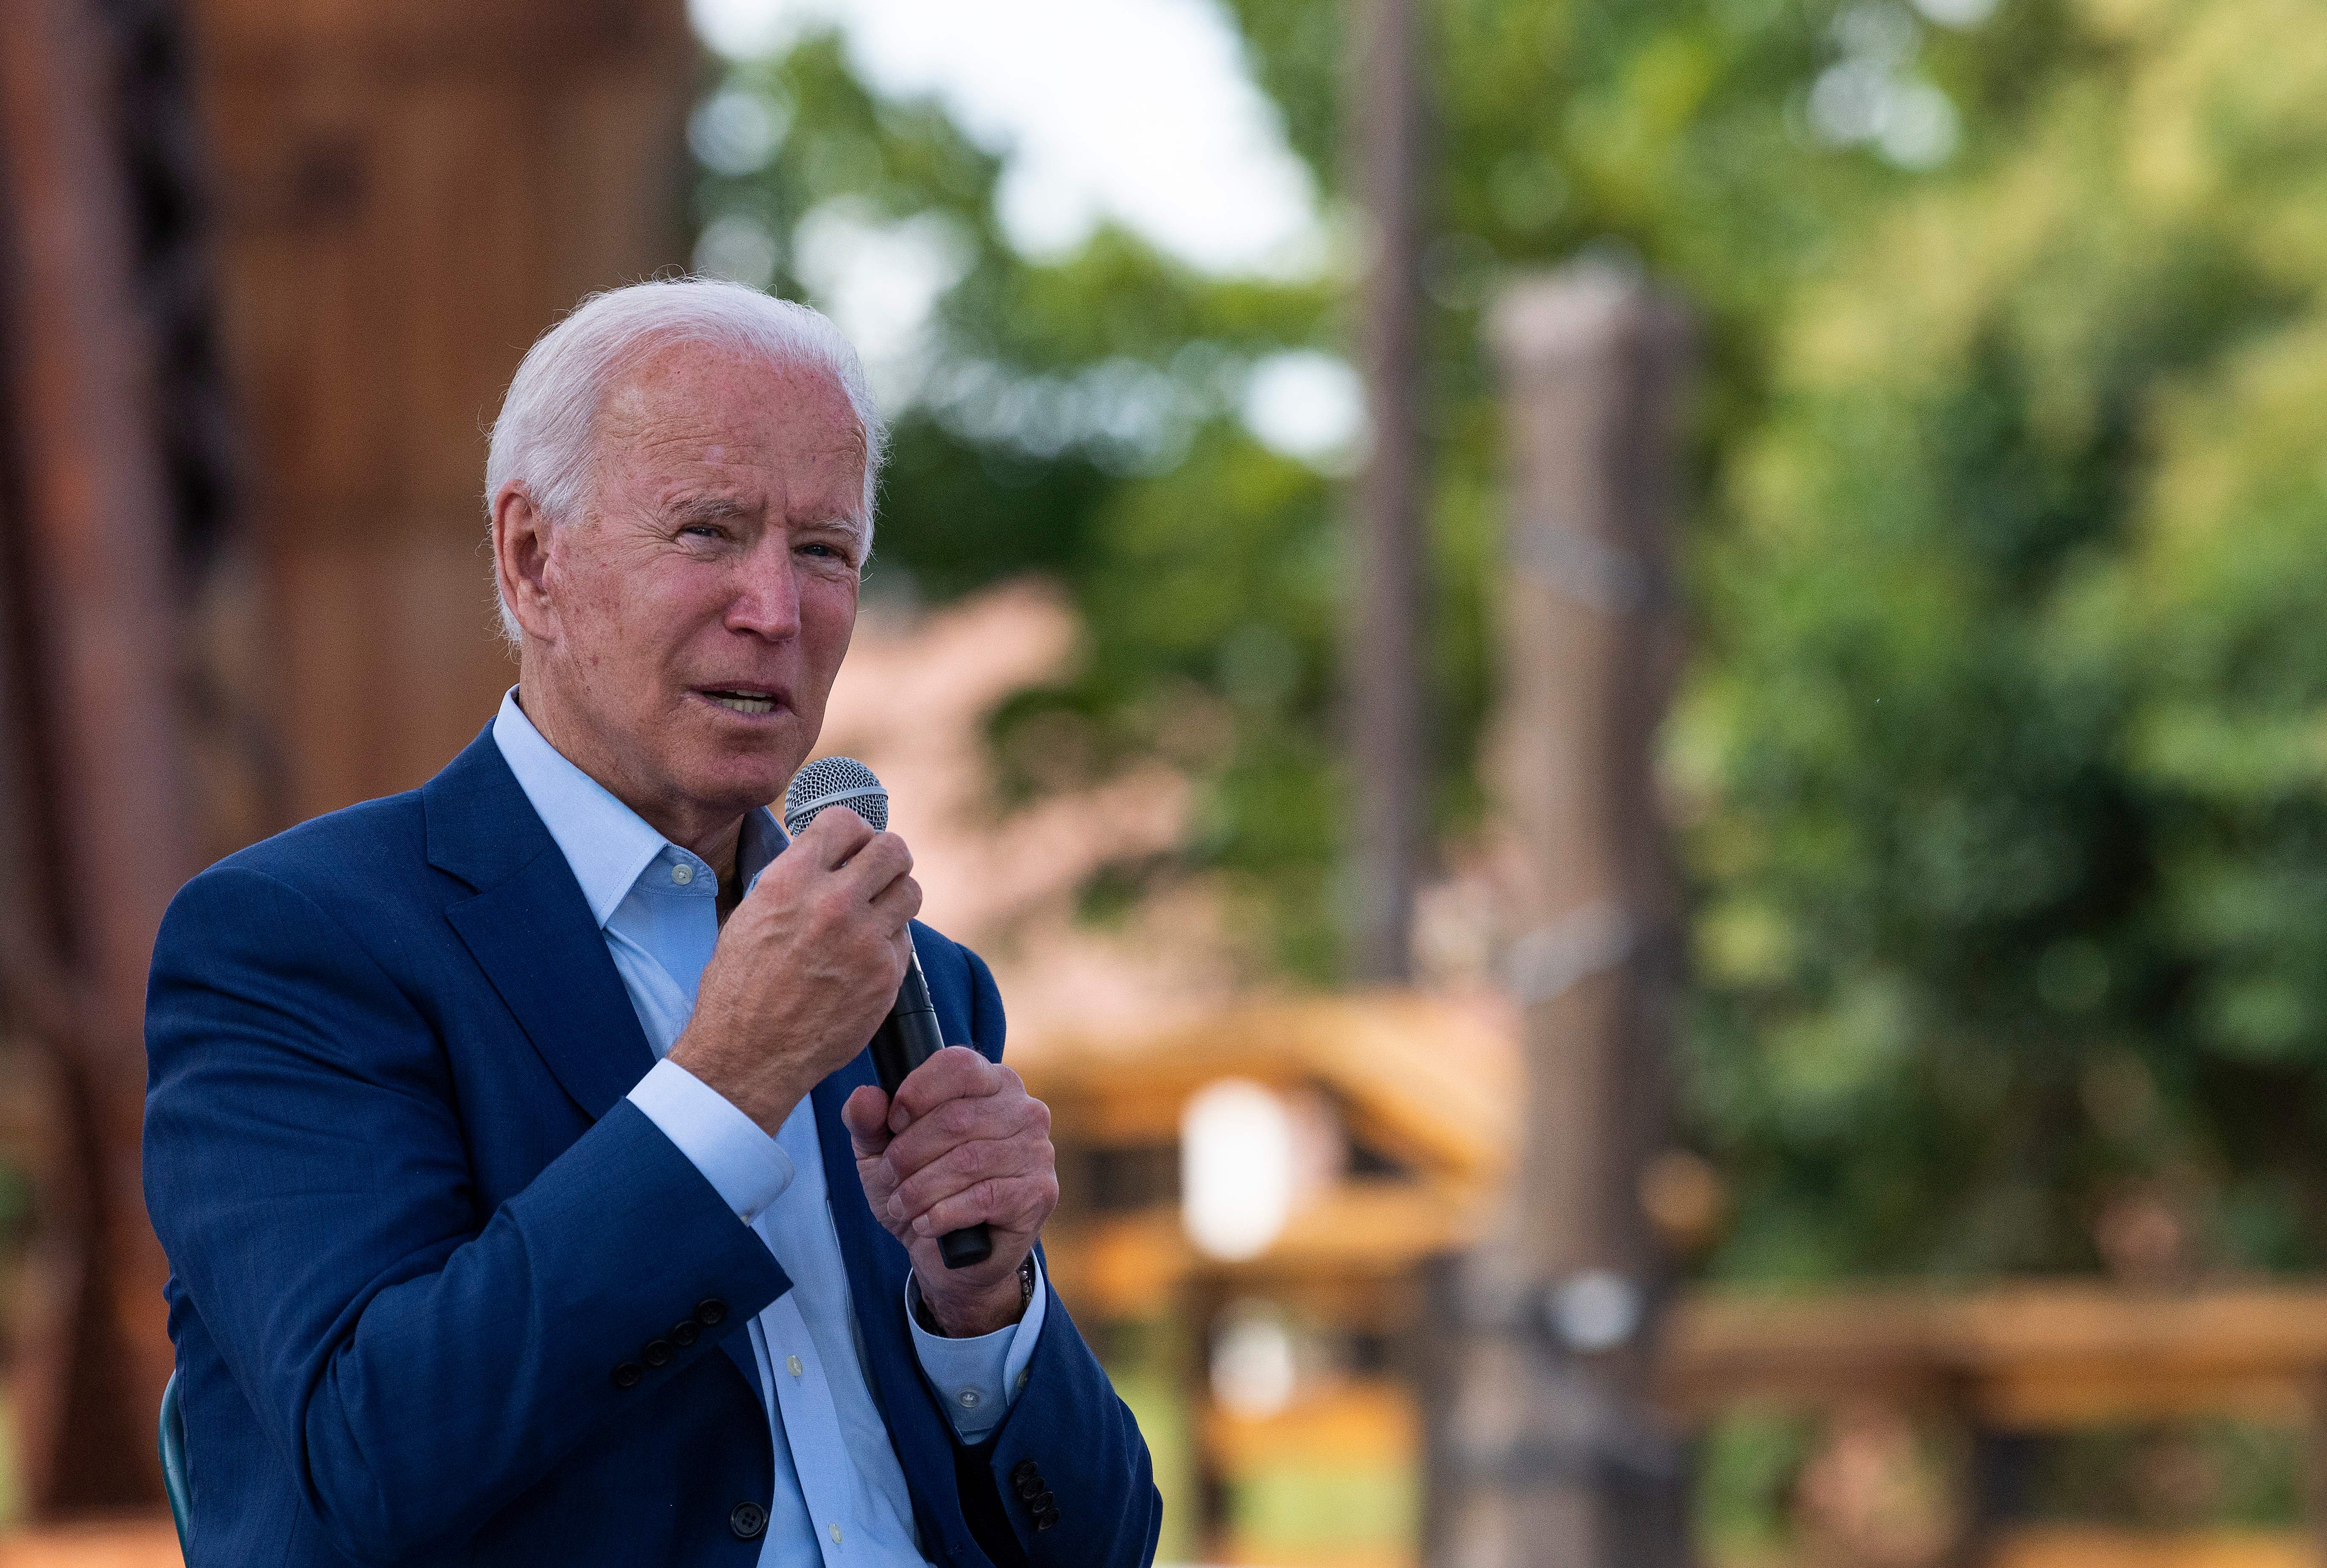 Joe Biden's Tax Plan: Who Would Benefit Most From His Proposed Tax Credits?